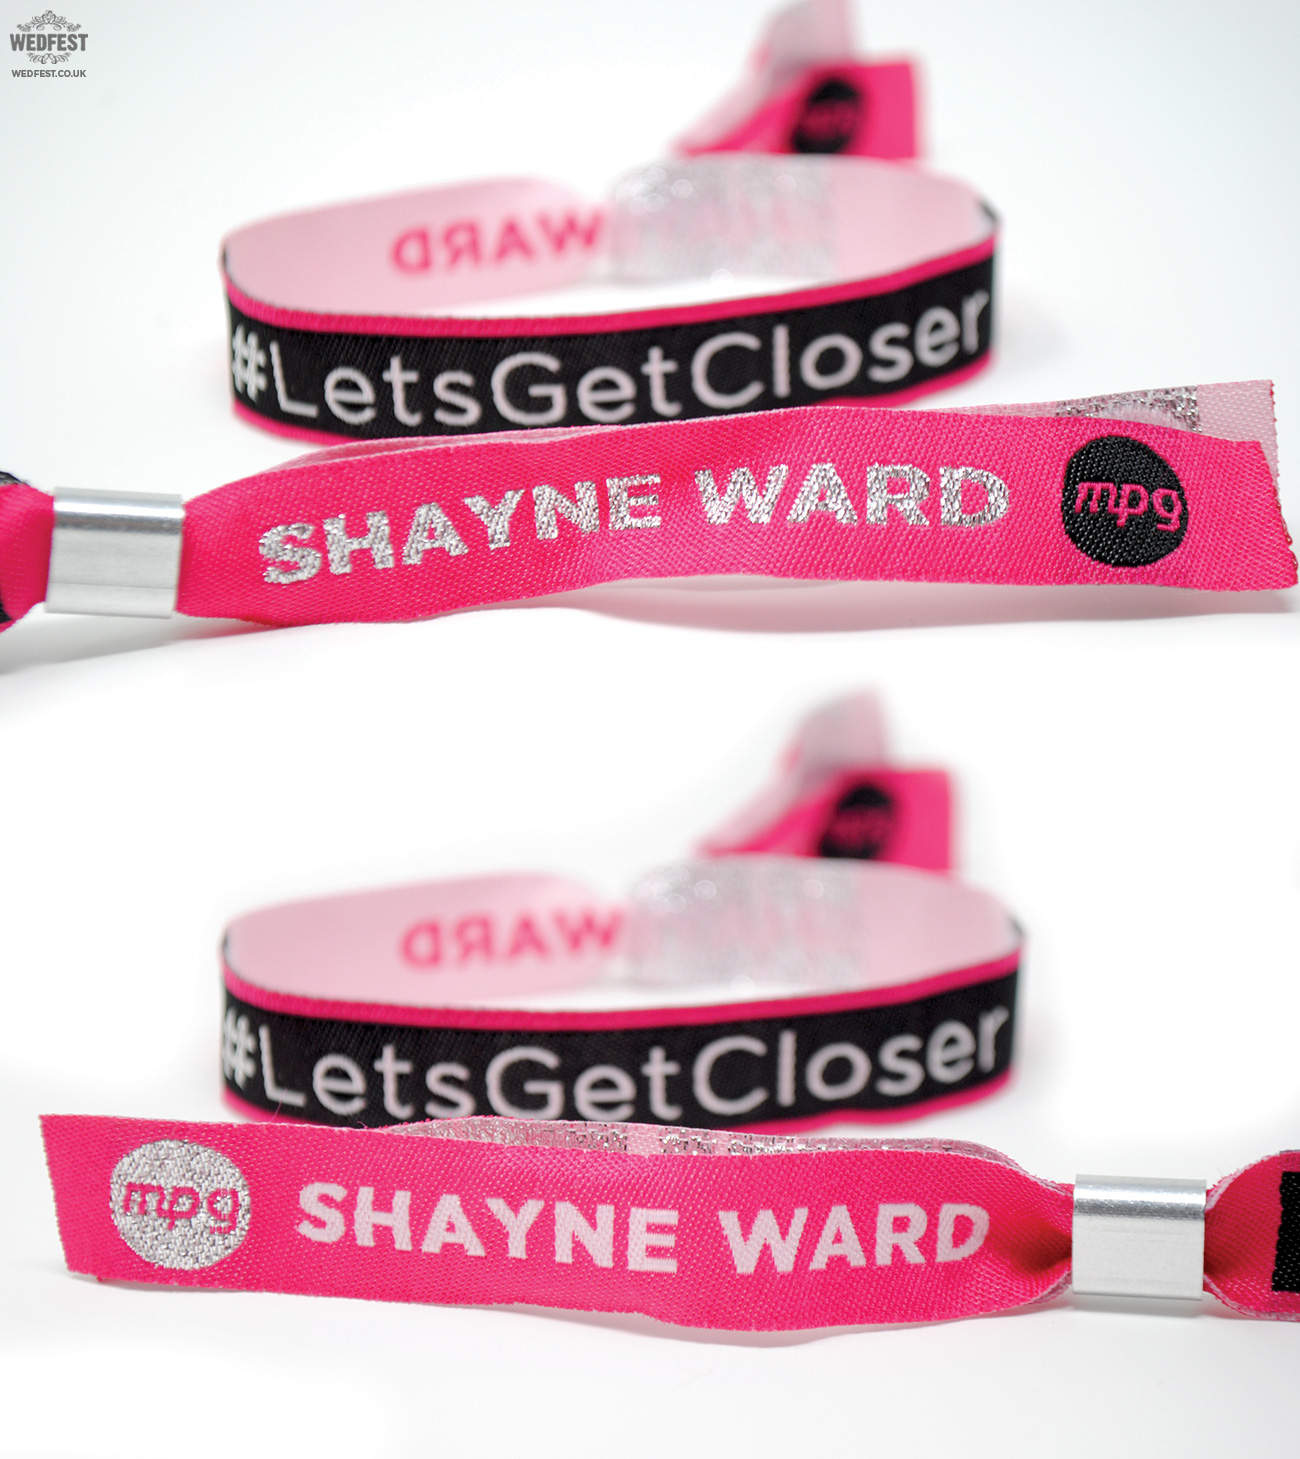 personalised wristbands for events festivals